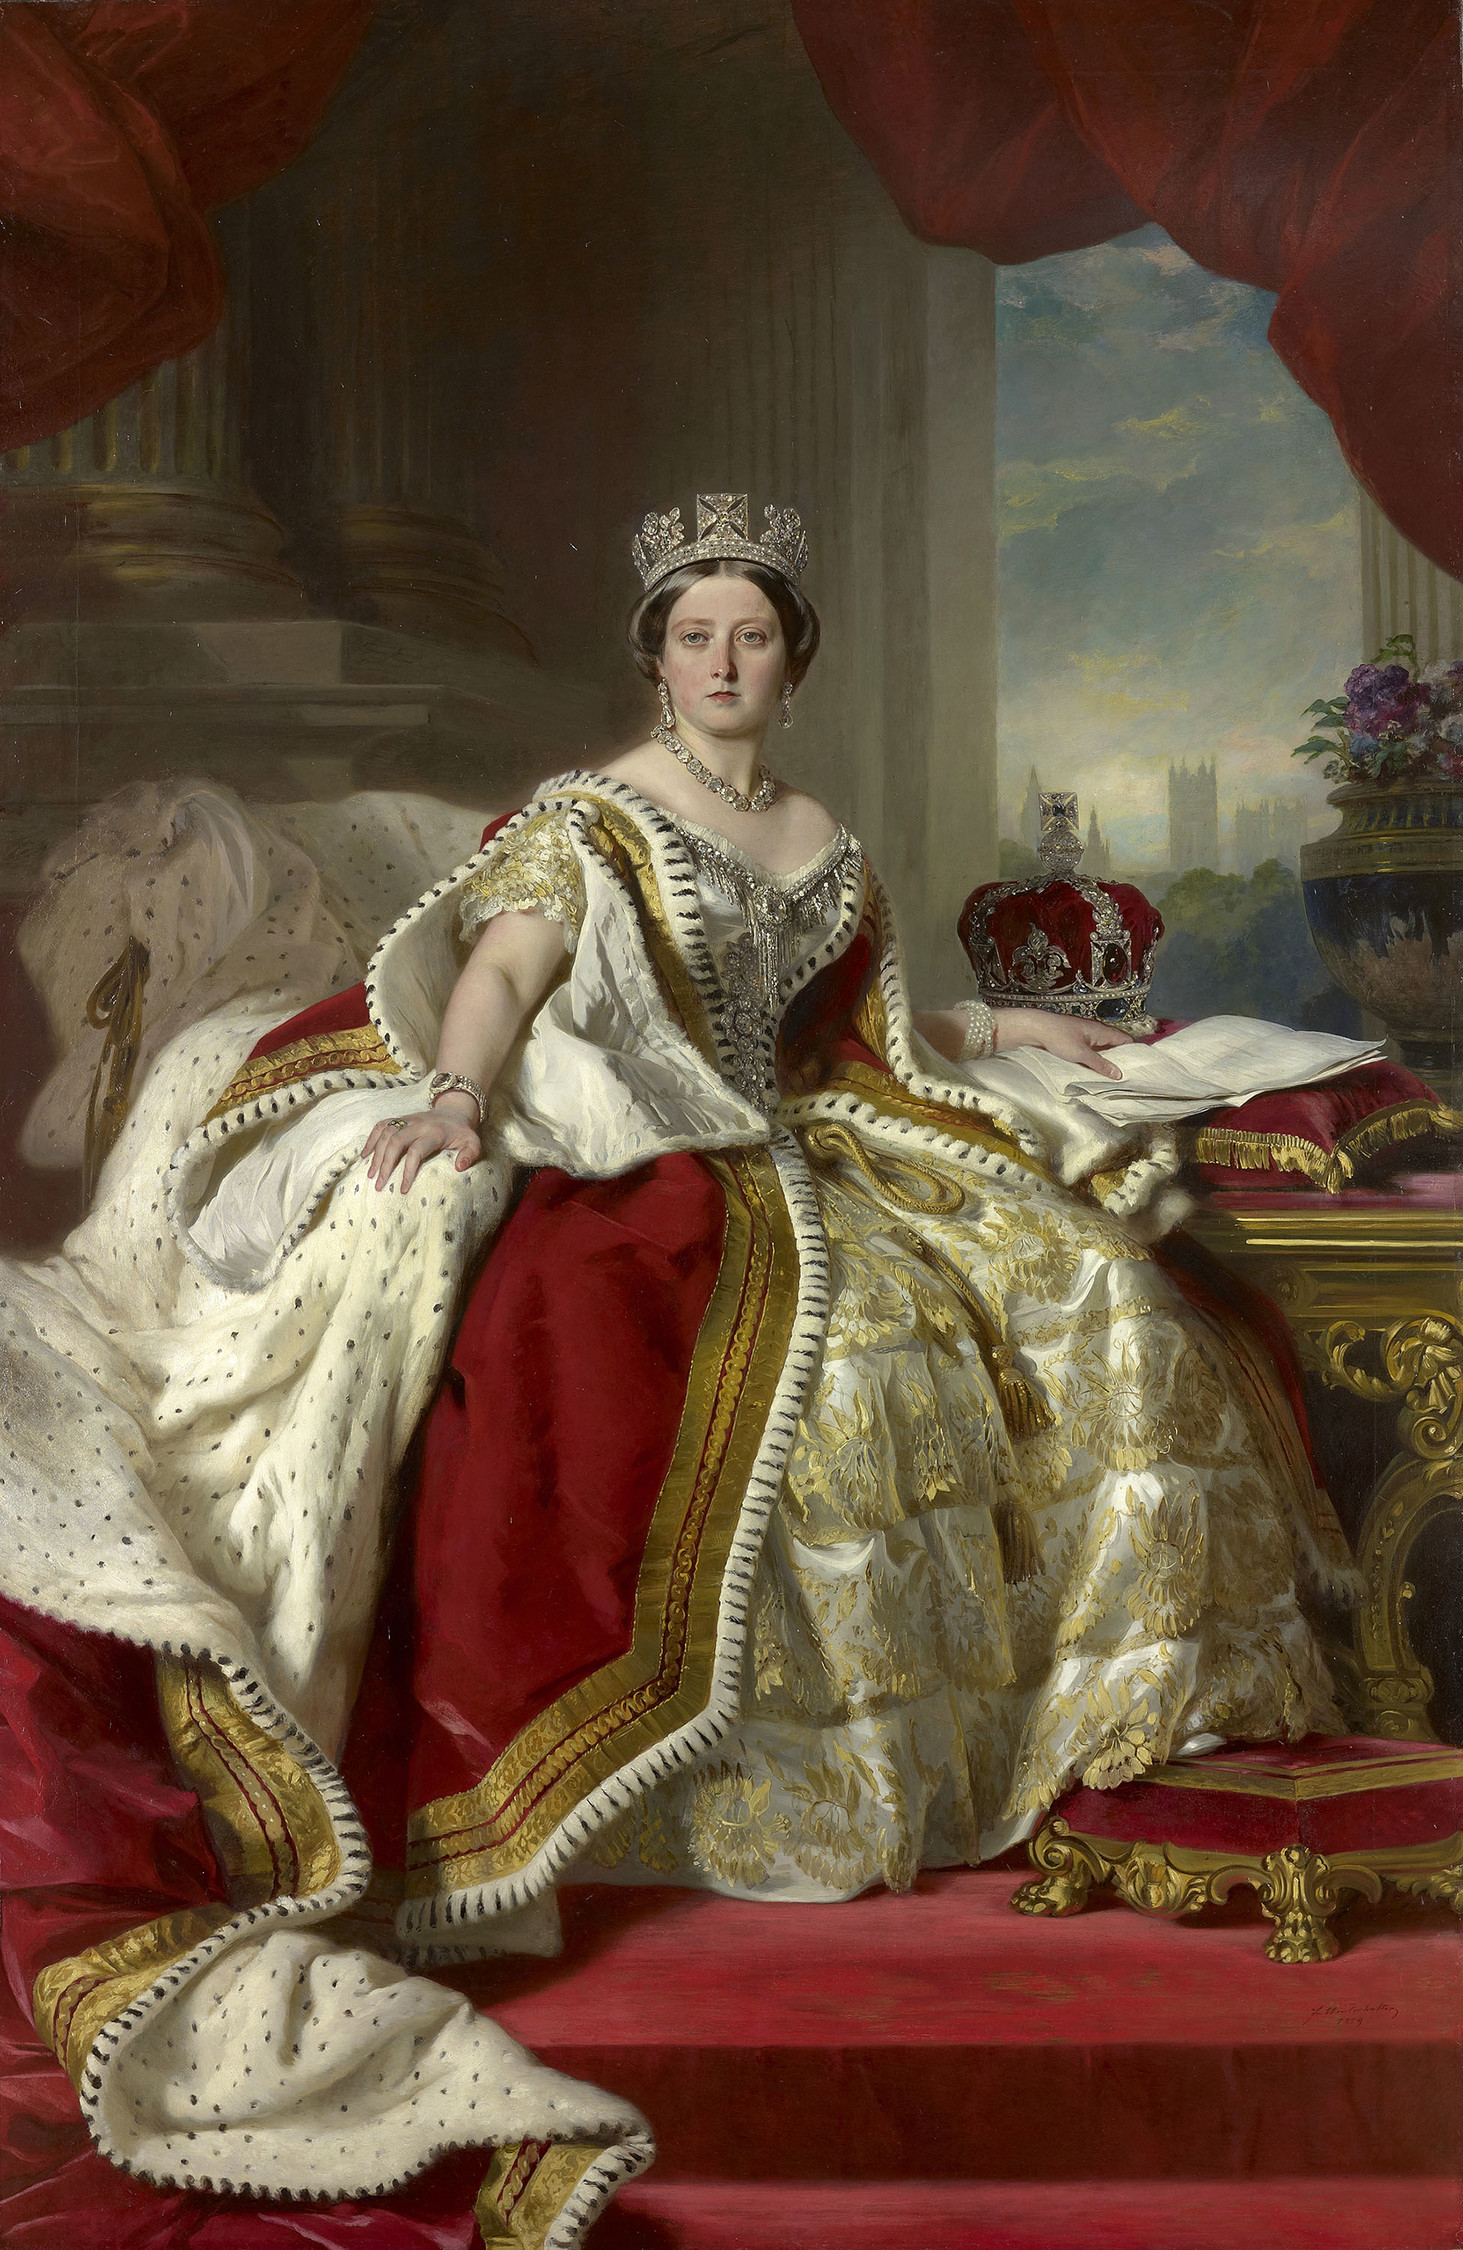 A portrait painting of Queen Victoria from 1859 as painted by German artist, Franz Xaver Winterhalter